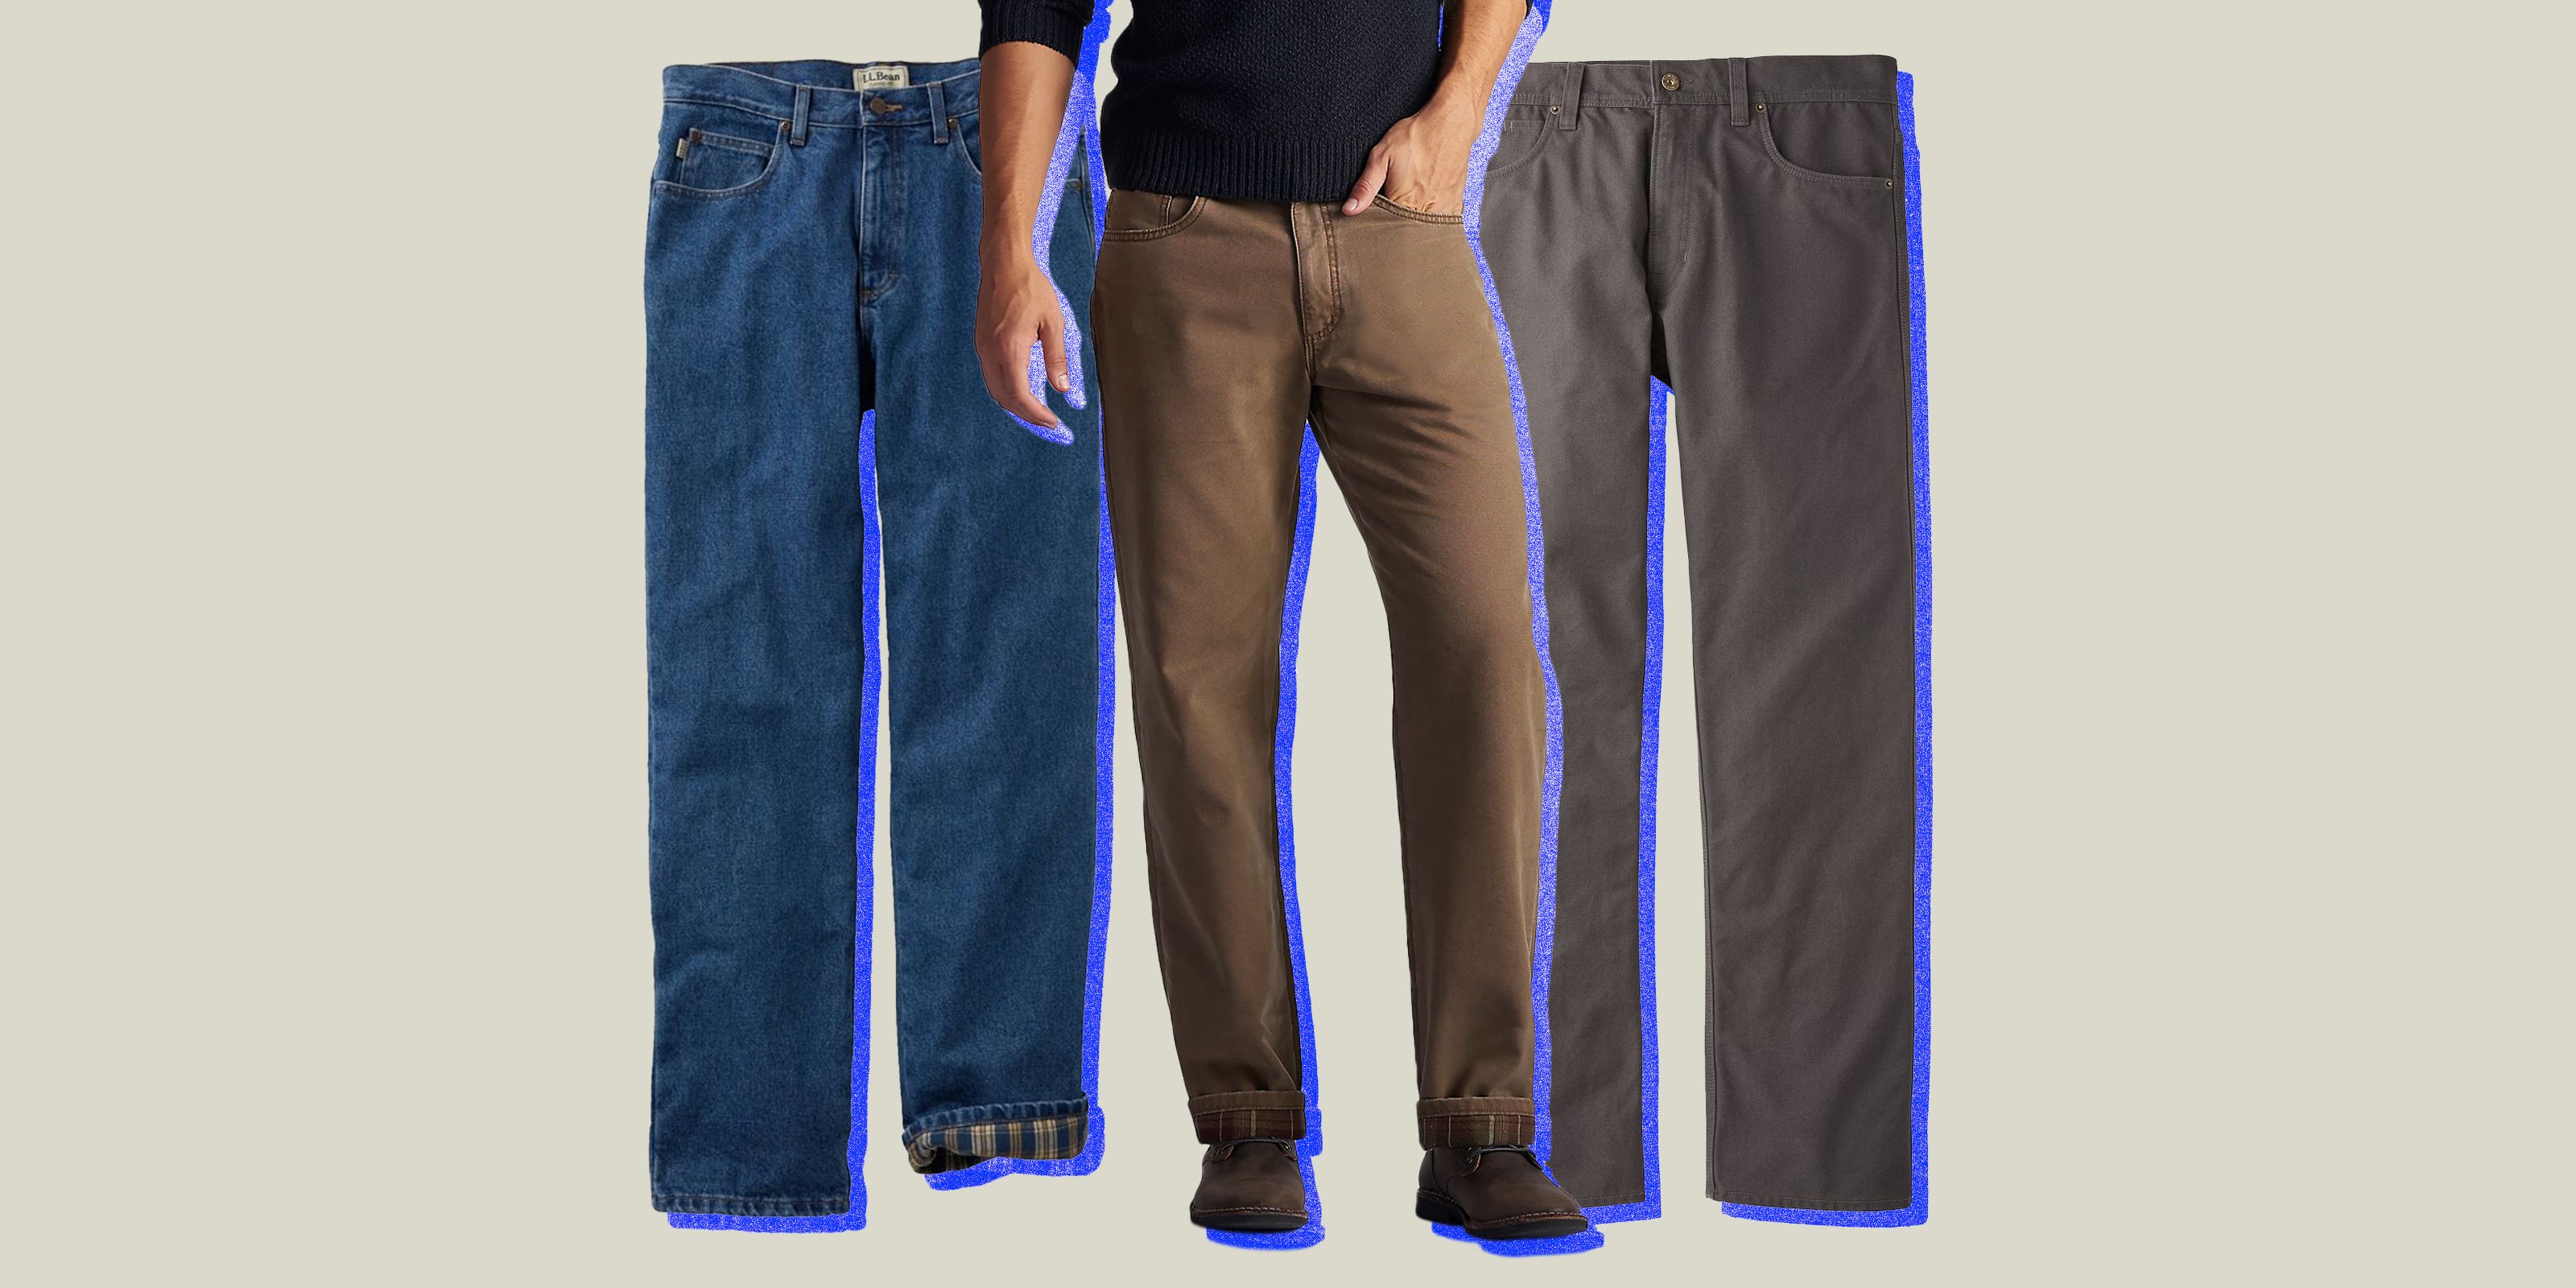 Mens Flannel Lined Jeans Pants Jackets and More